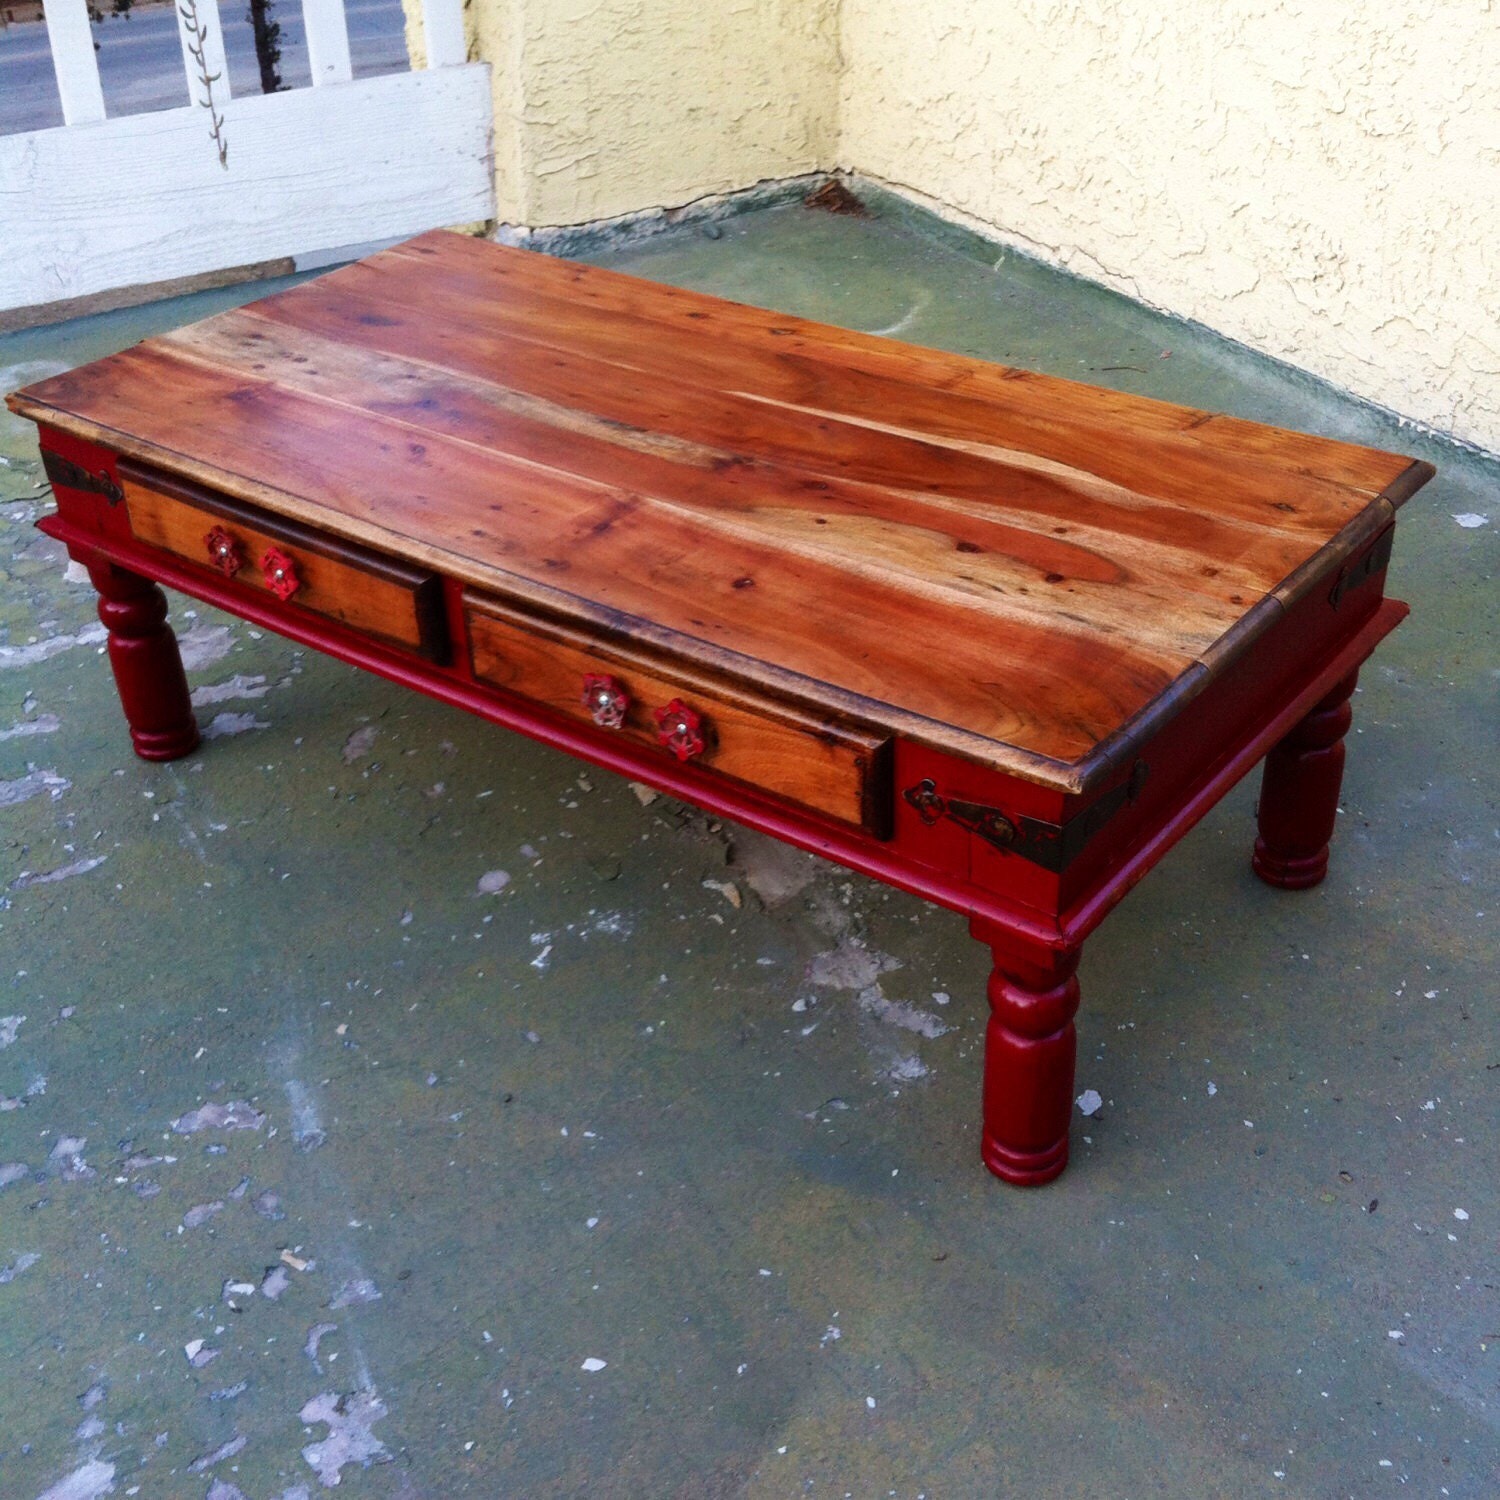 Sold Farmhouse Red Coffee Table Shab Chic Coffee Table focus for The Most Brilliant  distressed coffee table stain for Current House